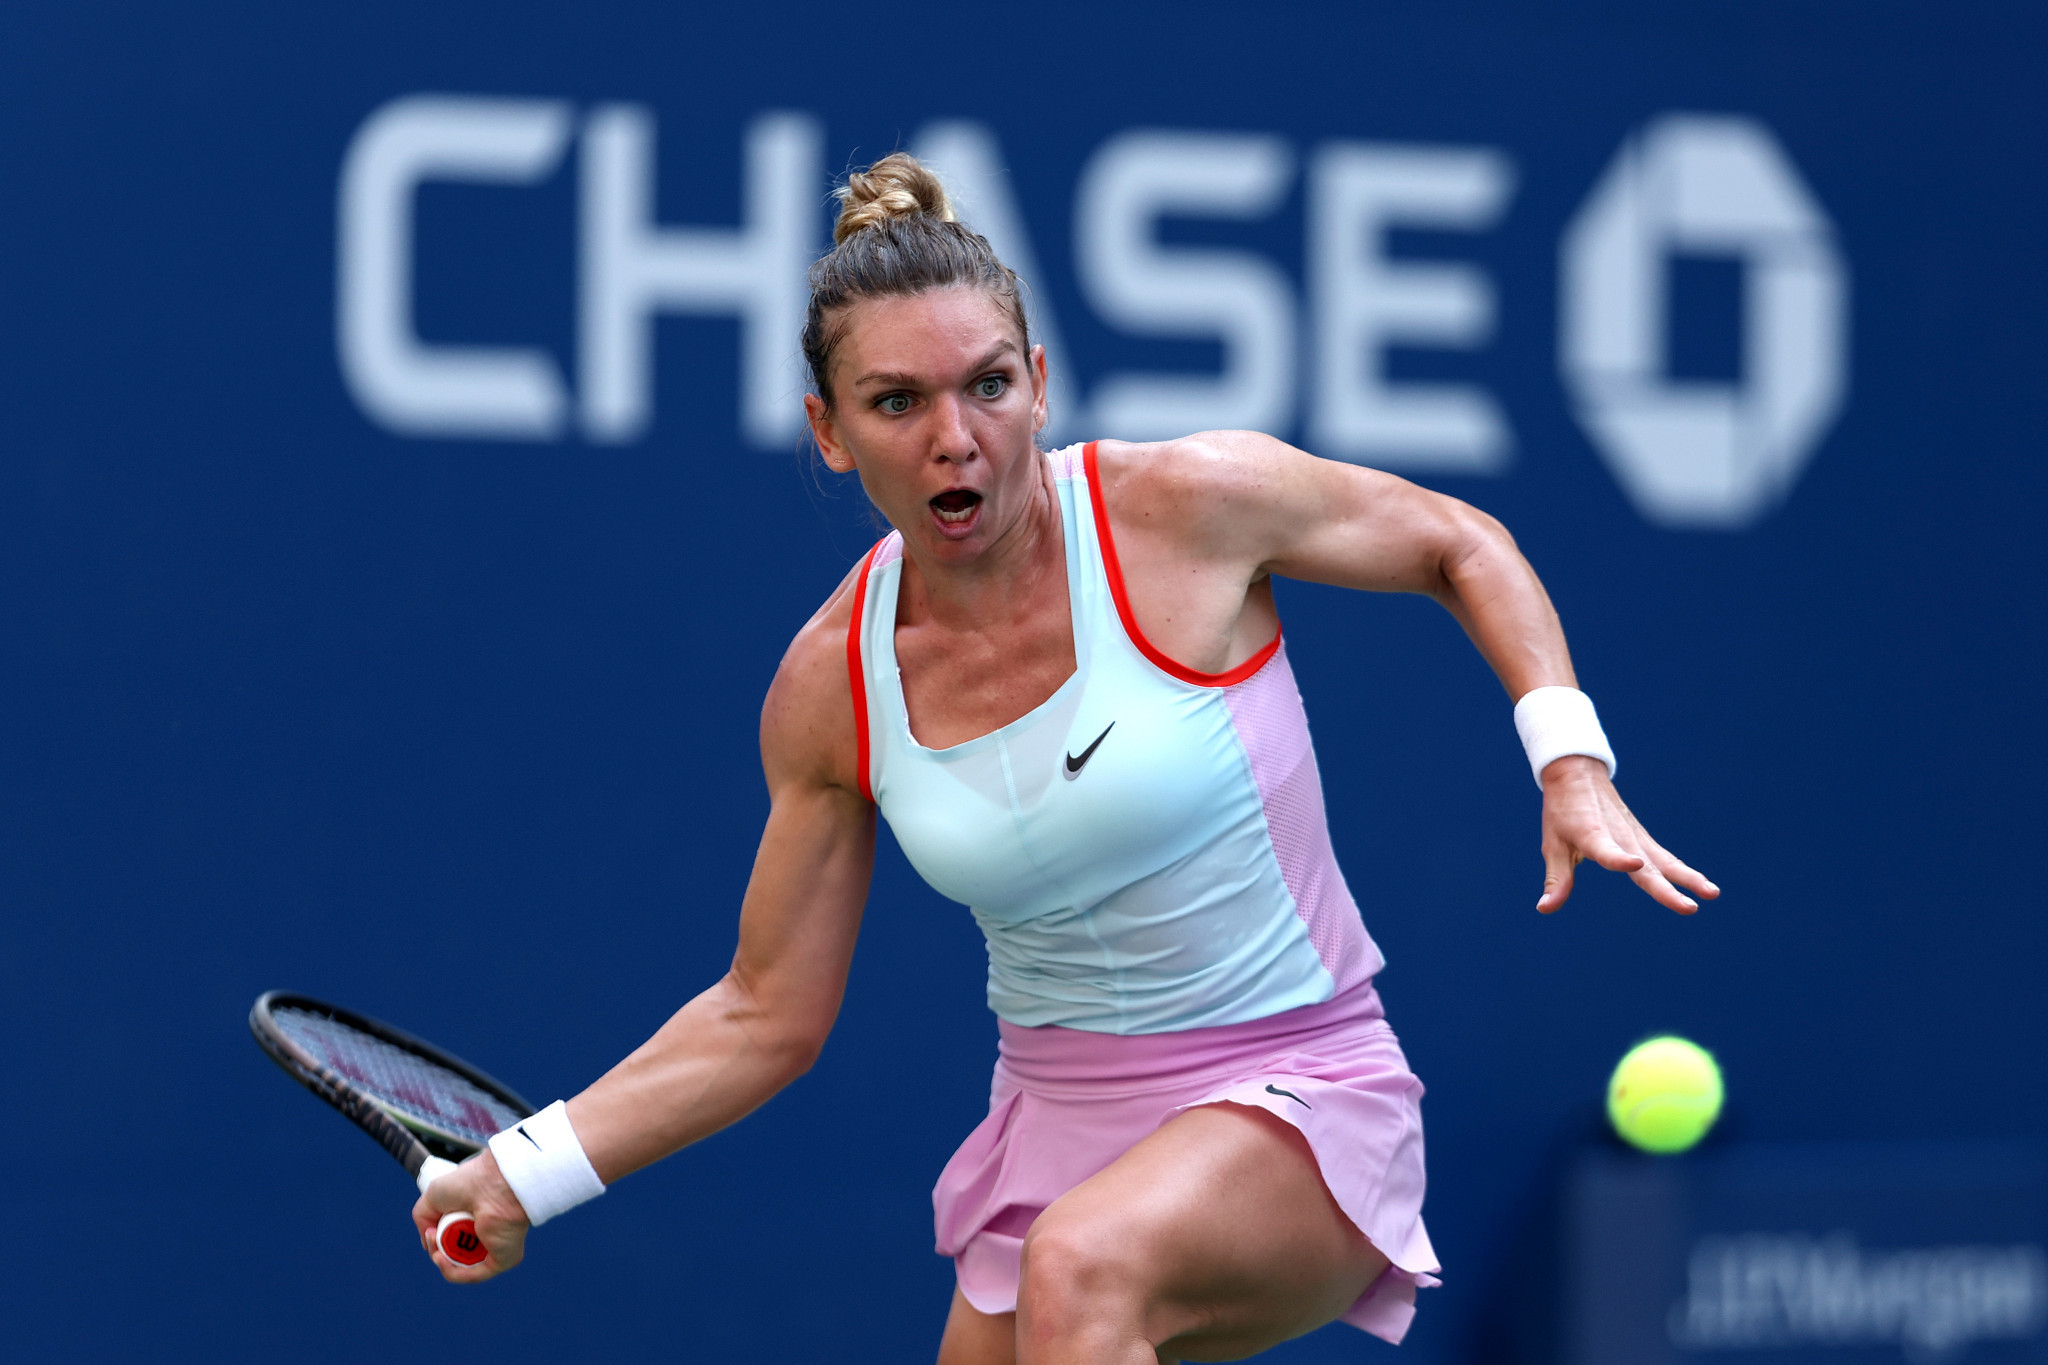 Ex-world number one Halep provisionally suspended over failed drugs test